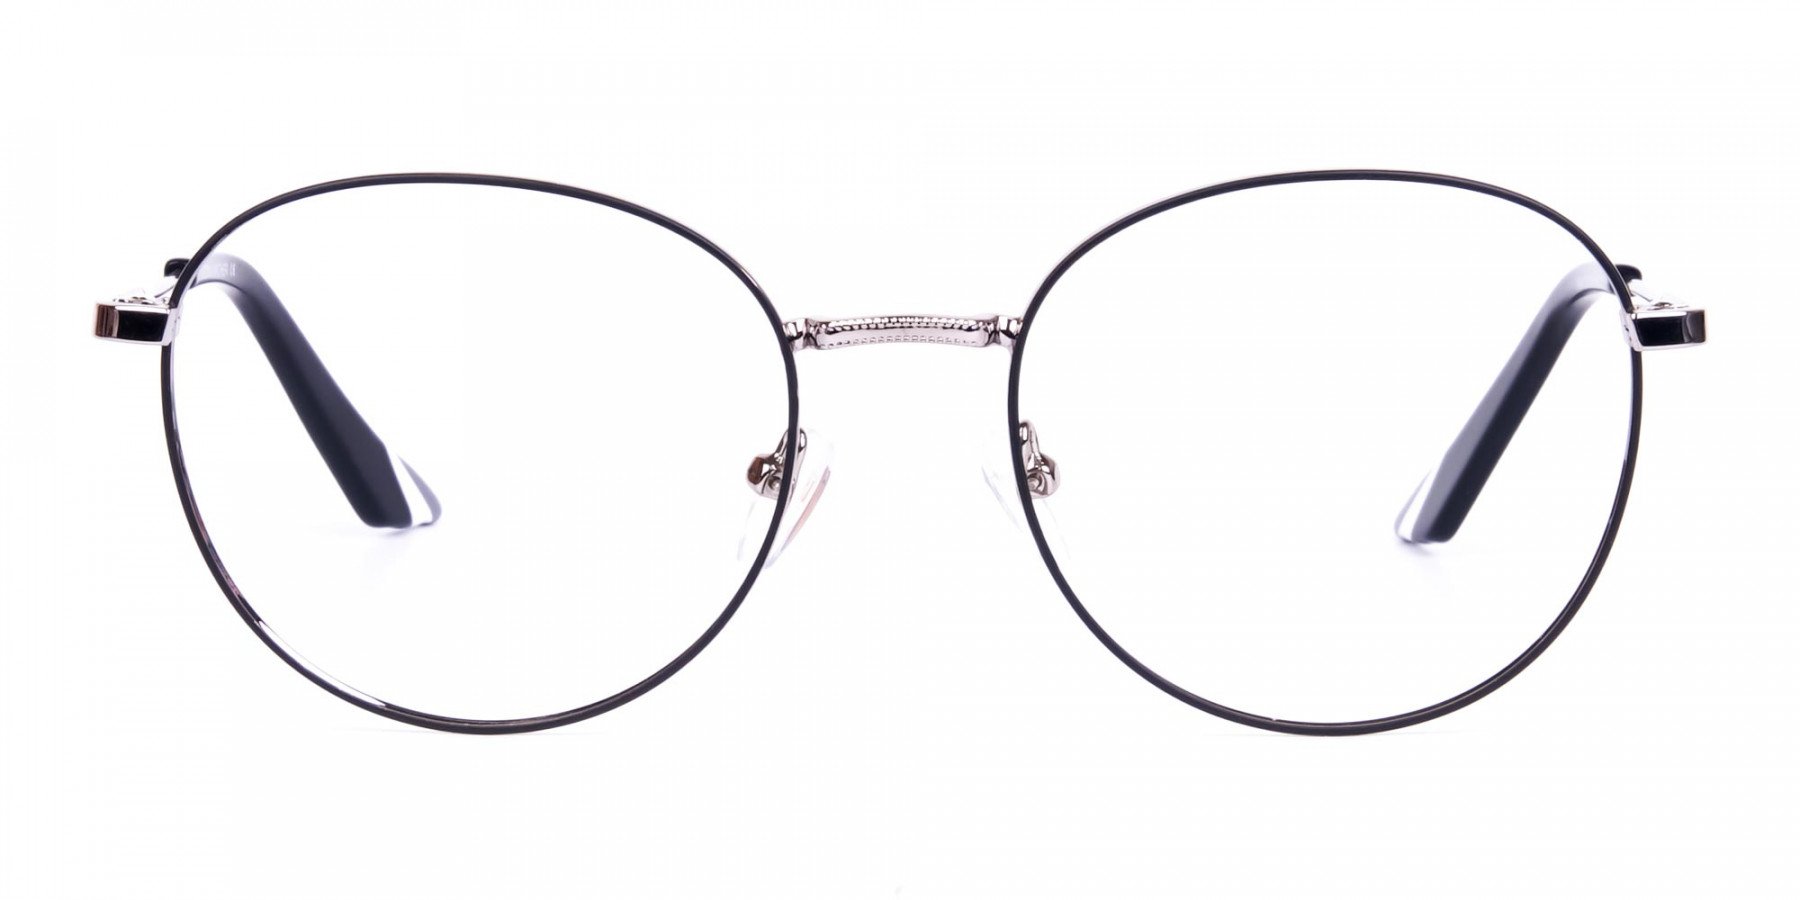 Classic-Black-and-Silver-Round-Glasses-1